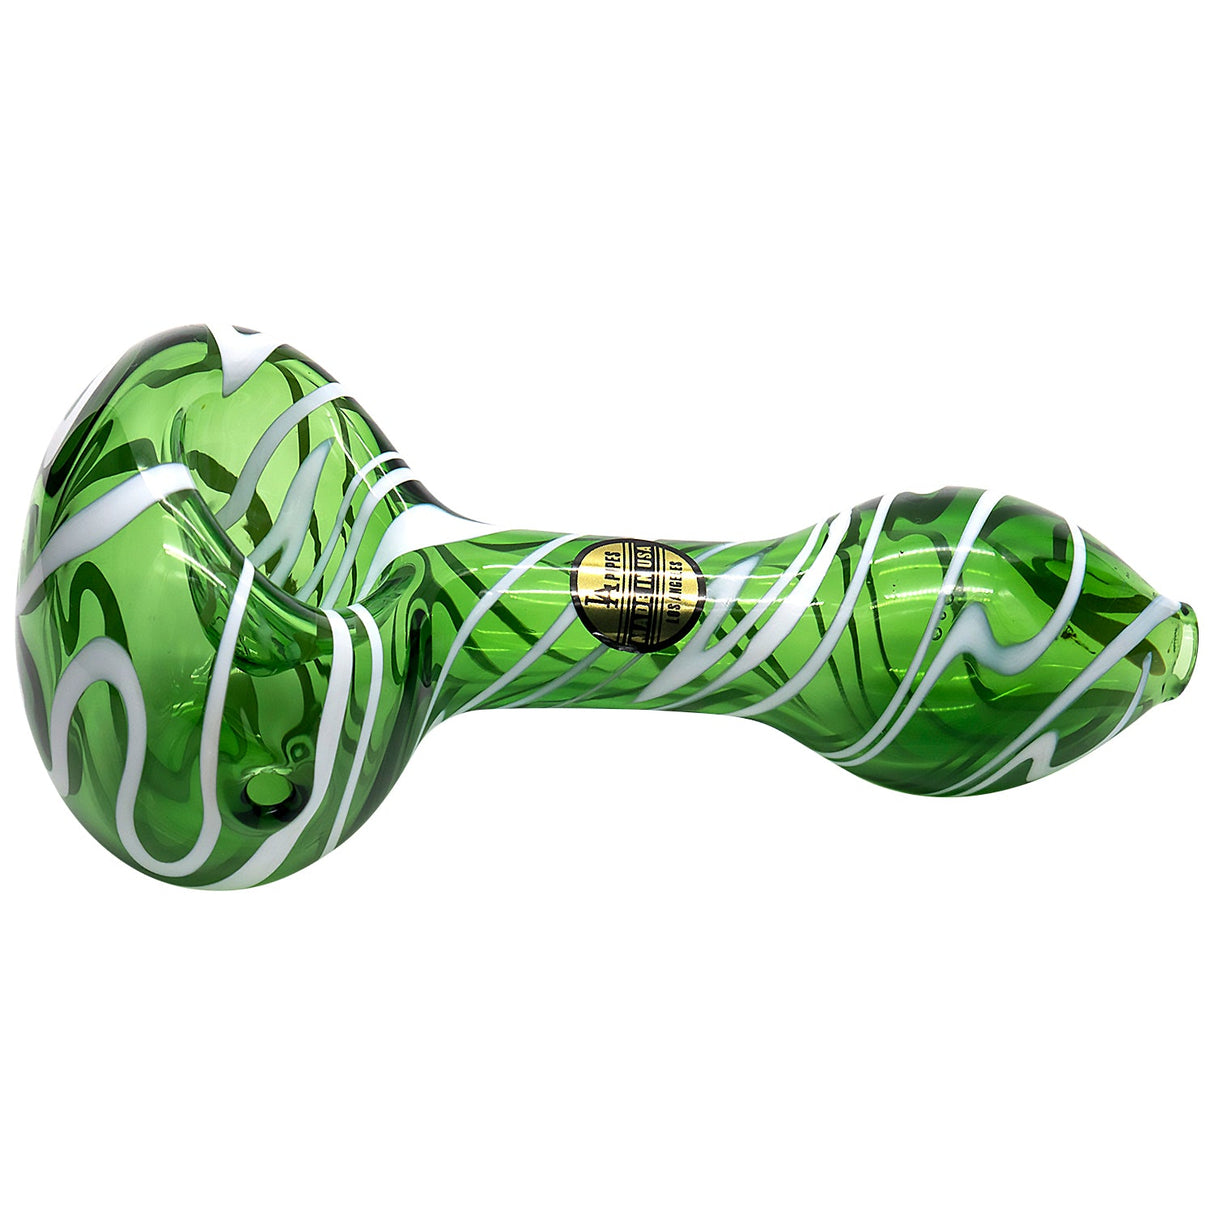 LA Pipes 'Warped Space' Color Glass Hand-Pipe, Spoon Design, 4.5" Length, Side View